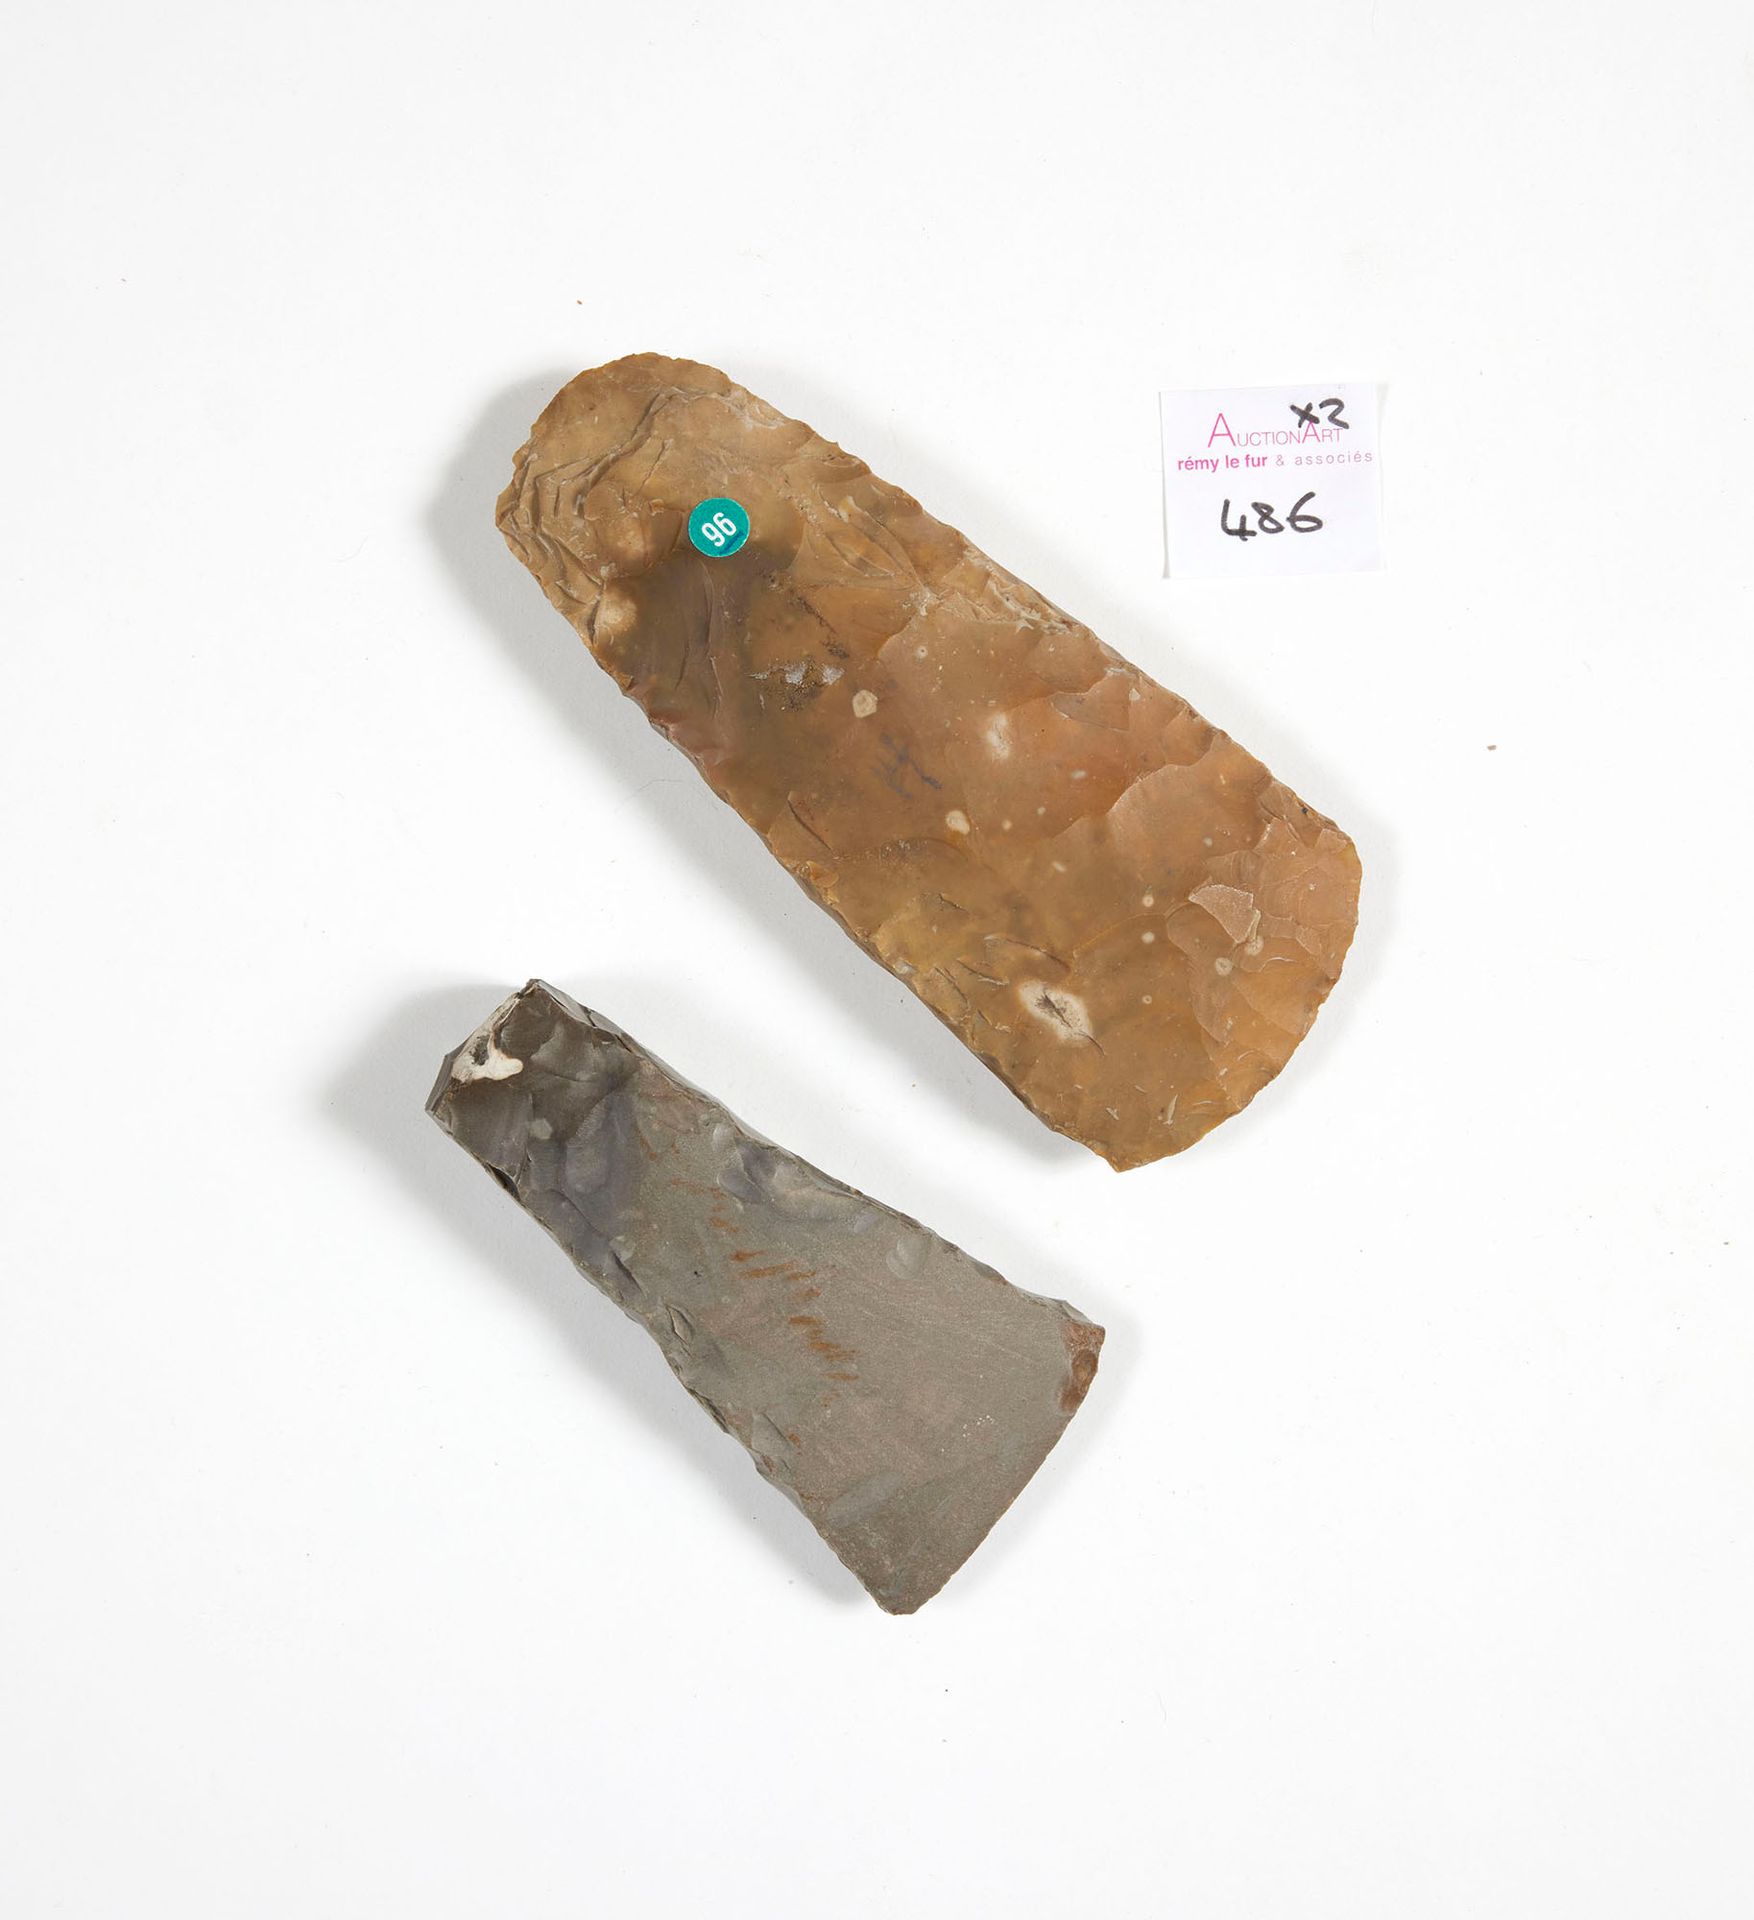 Lot de deux haches Lot of two axes

one partially cut.

Grey and brown flint.

D&hellip;